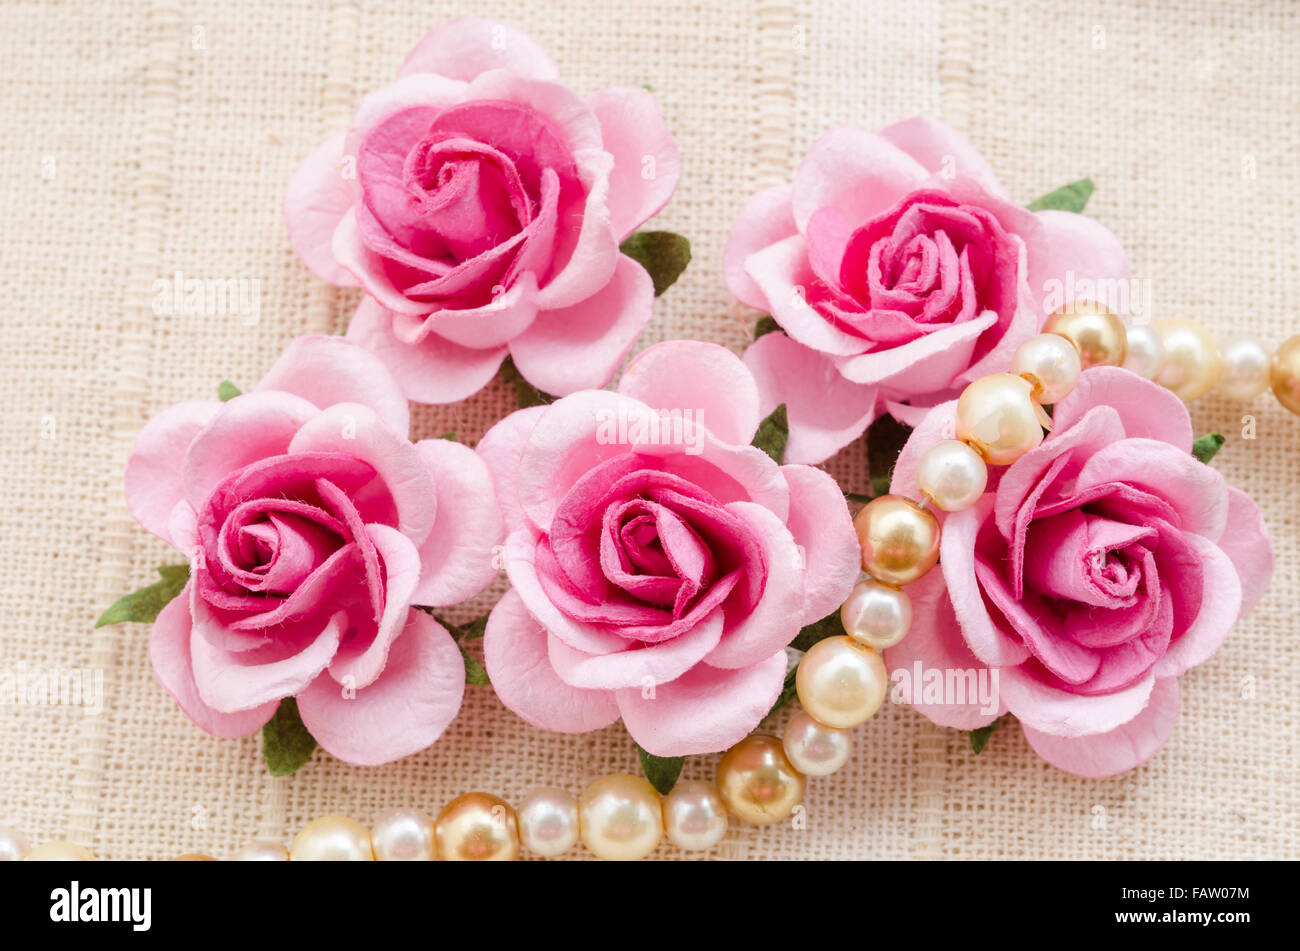 Pink rose with pearls on fabric background. Stock Photo